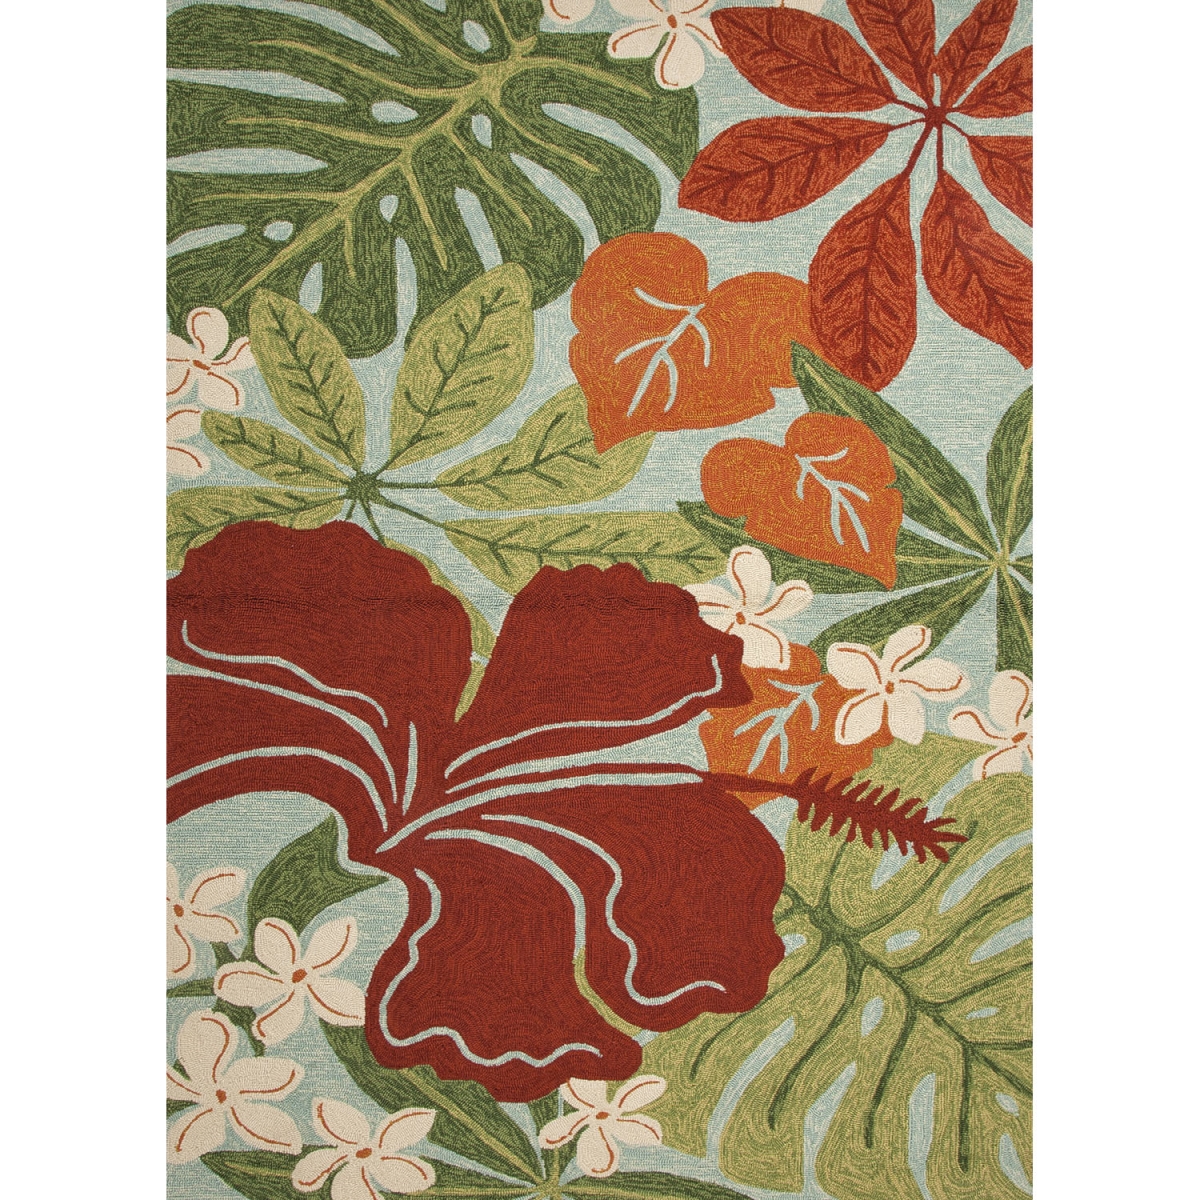 Jaipur Rugs RUG122492 Coastal Lagoon Hooked Poly Luau Design Rectangle Rug, Surf Spray - 7 ft. 6 in. x 9 ft. 6 in.